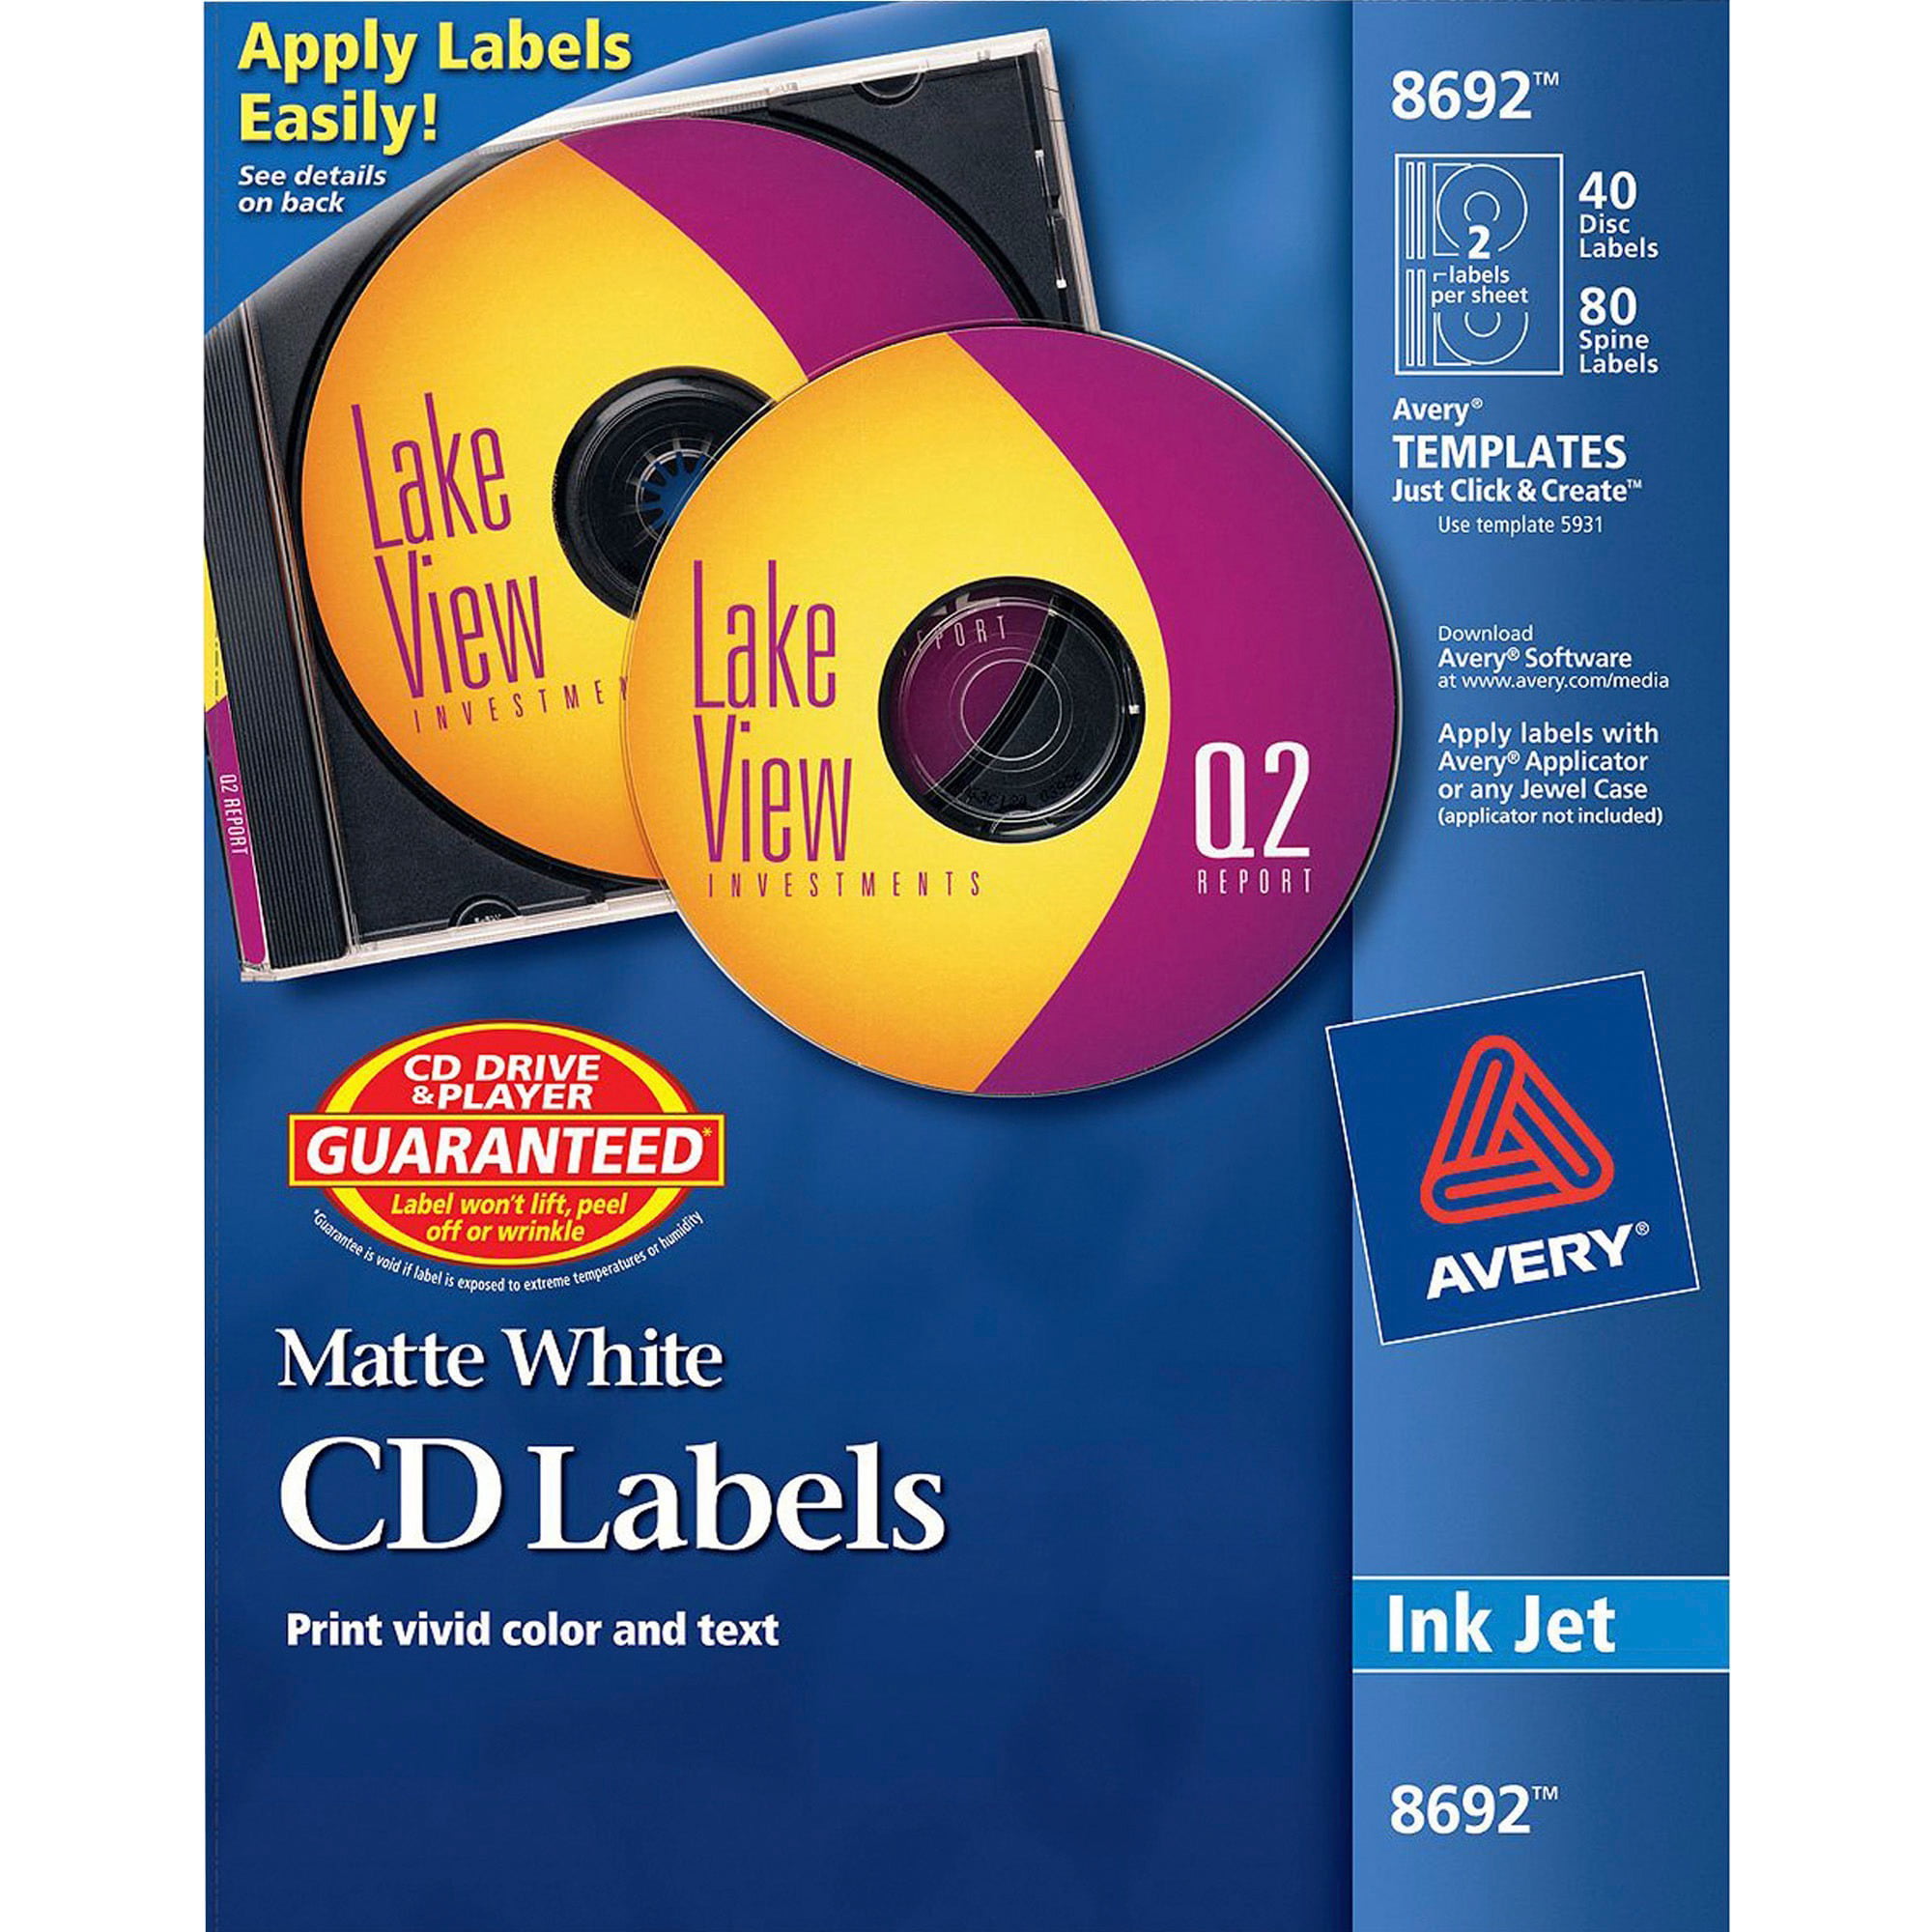 Avery 5692 Cd Label Template Word